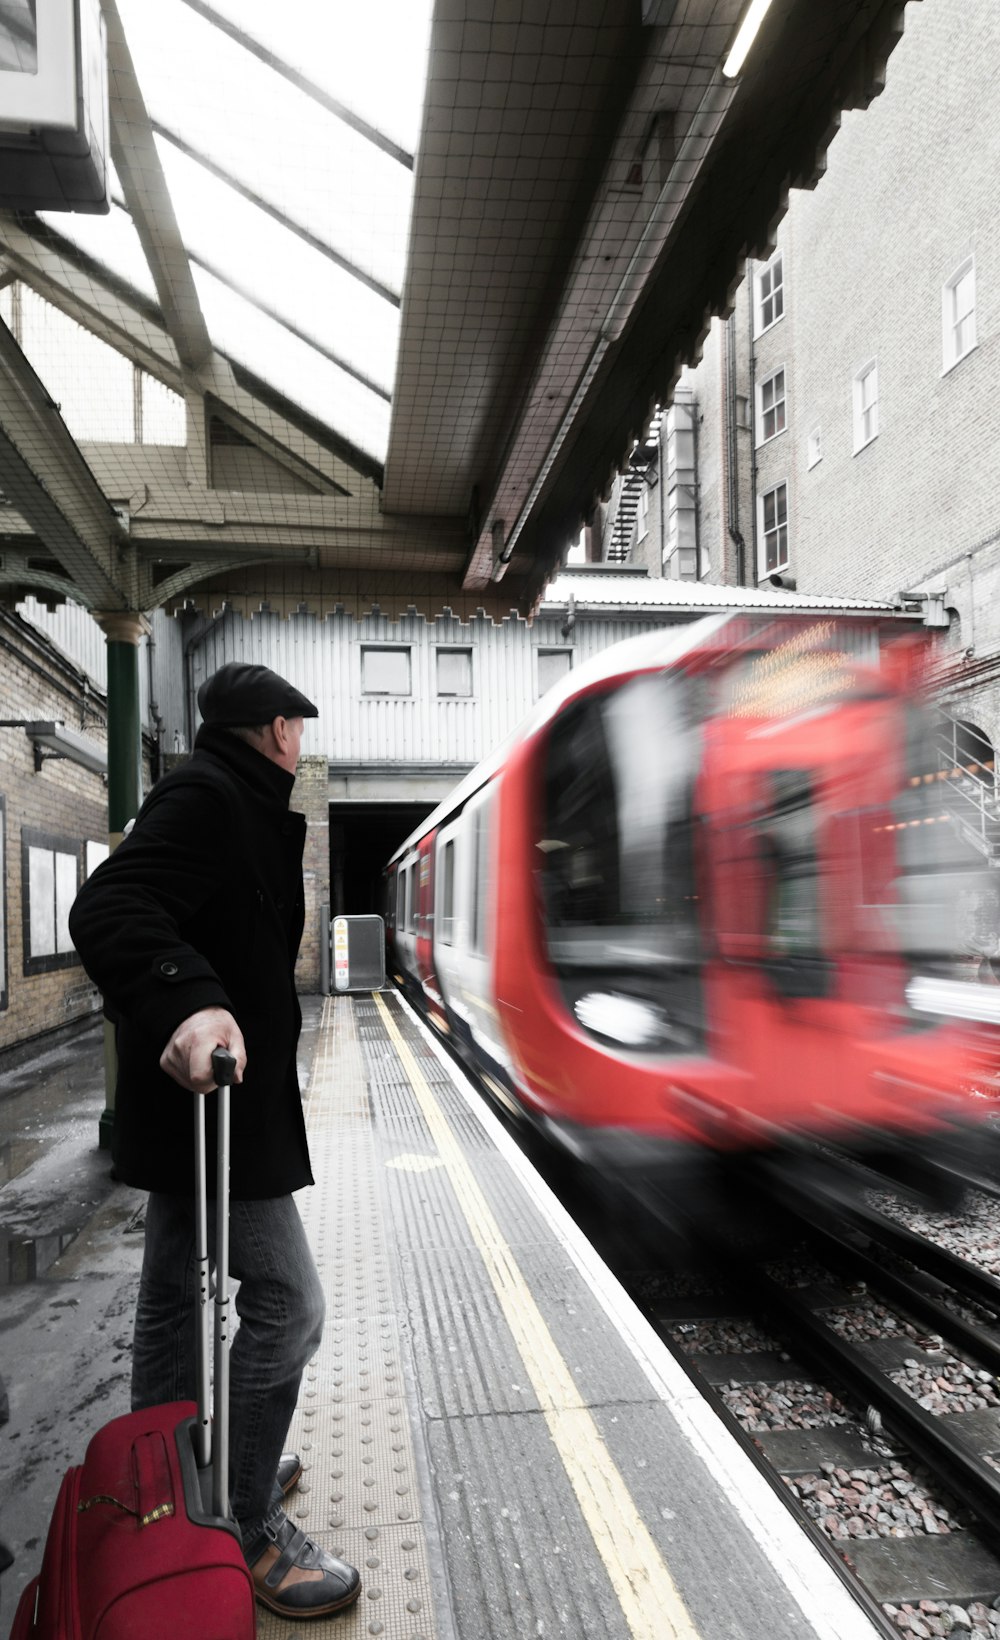 man holding luggage waiting on railway with red train passing by